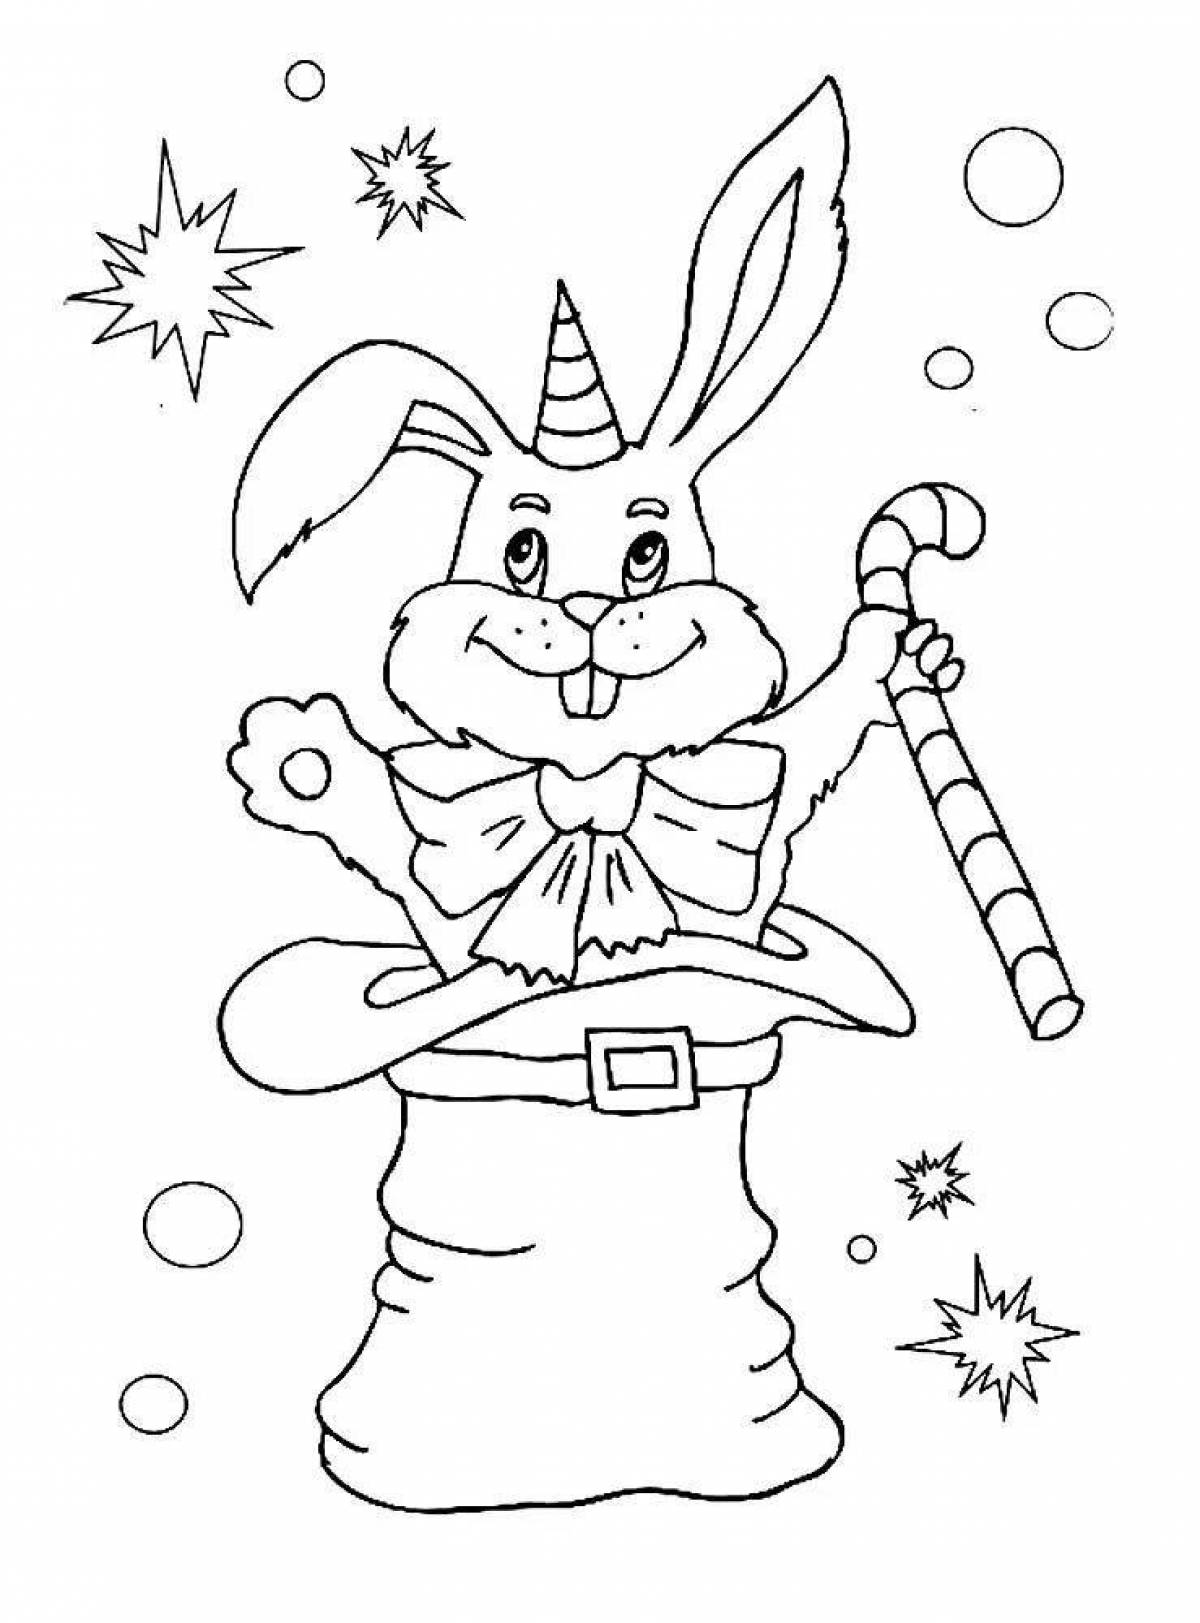 Gorgeous new year bunny coloring book